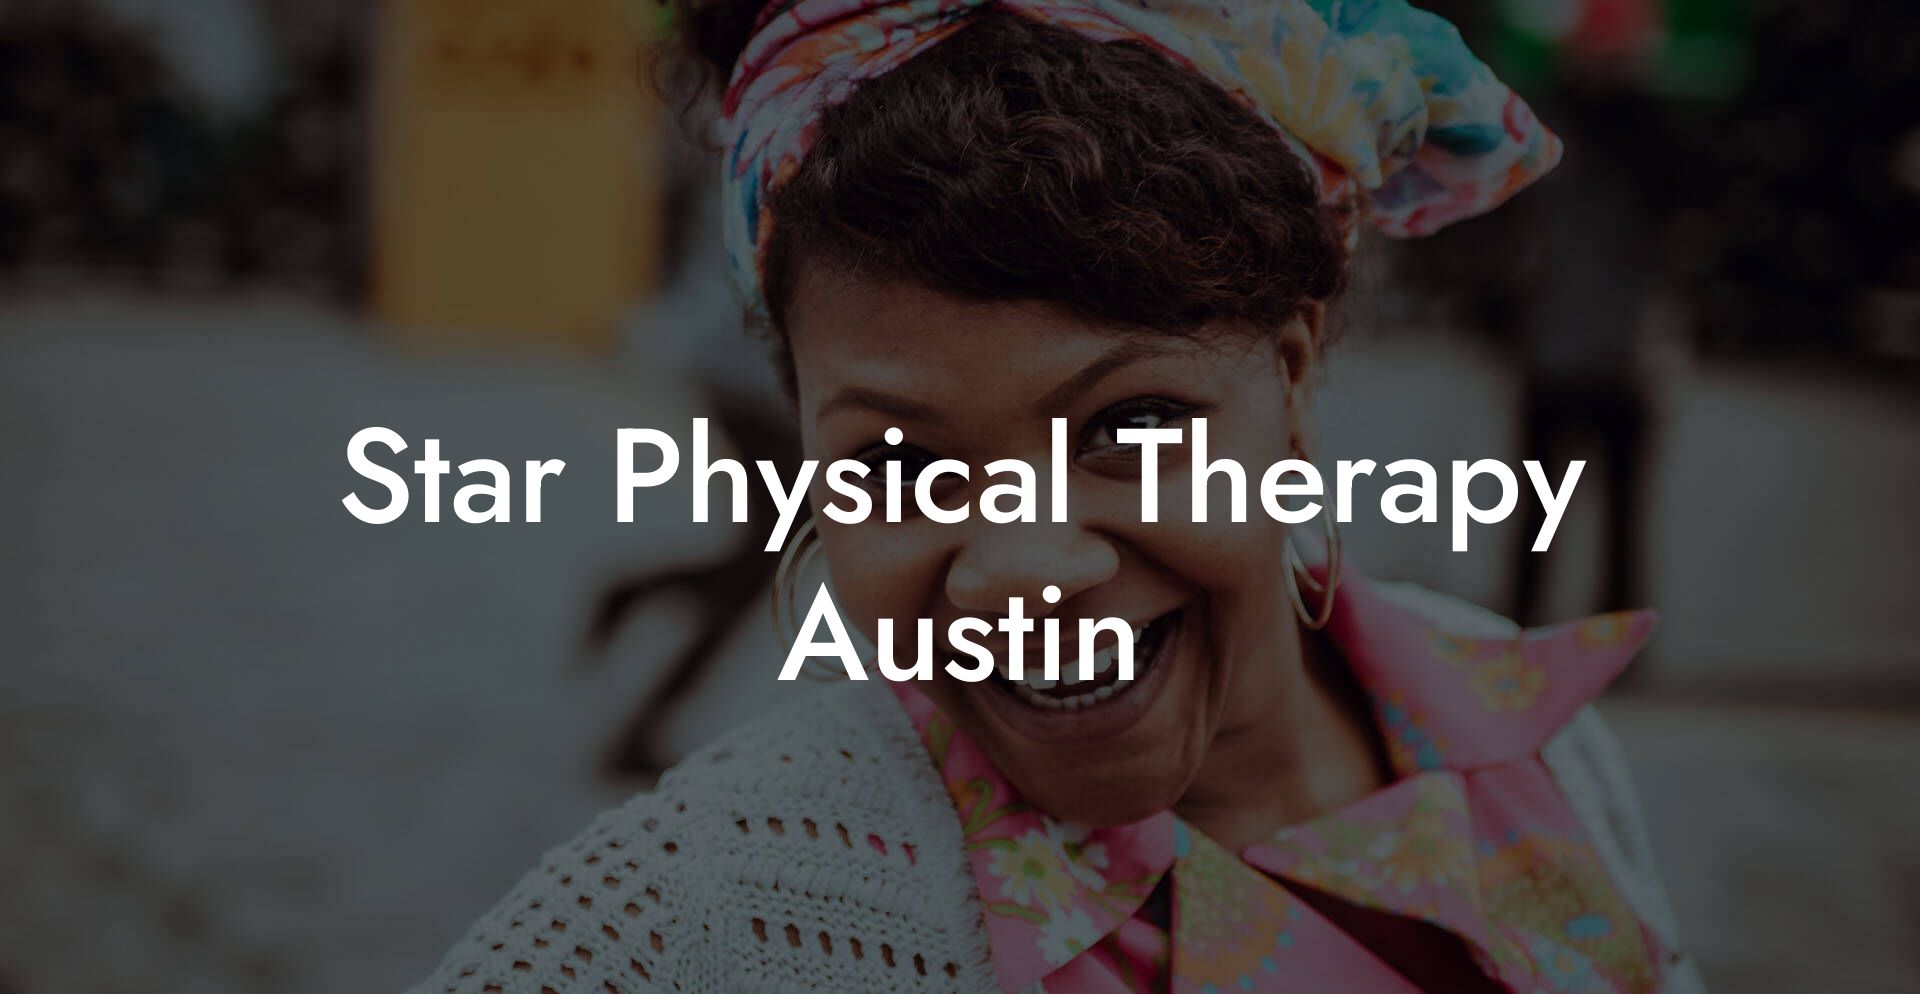 Star Physical Therapy Austin